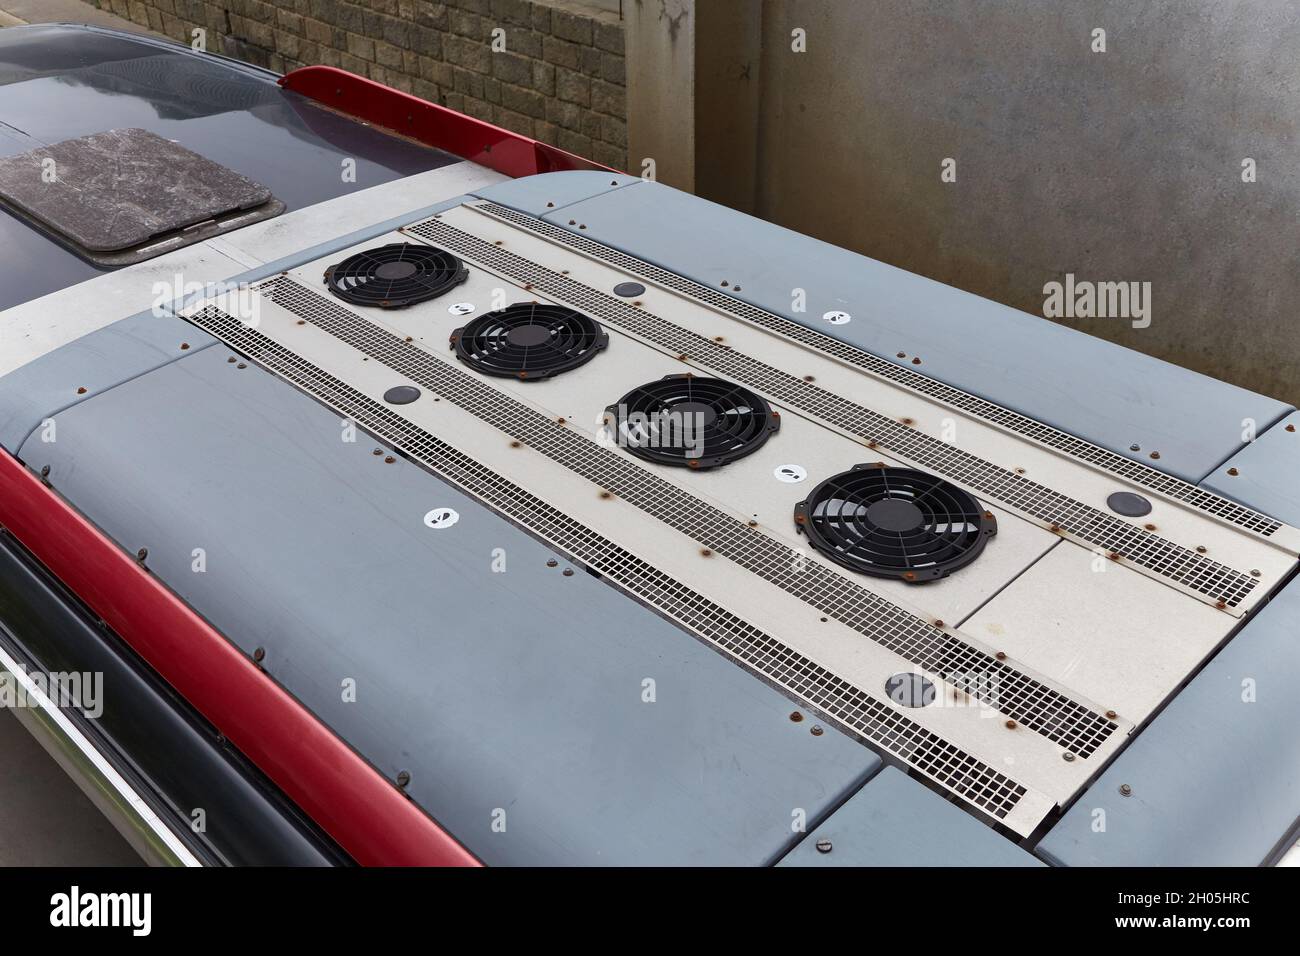 Bus air-conditioning system Stock Photo